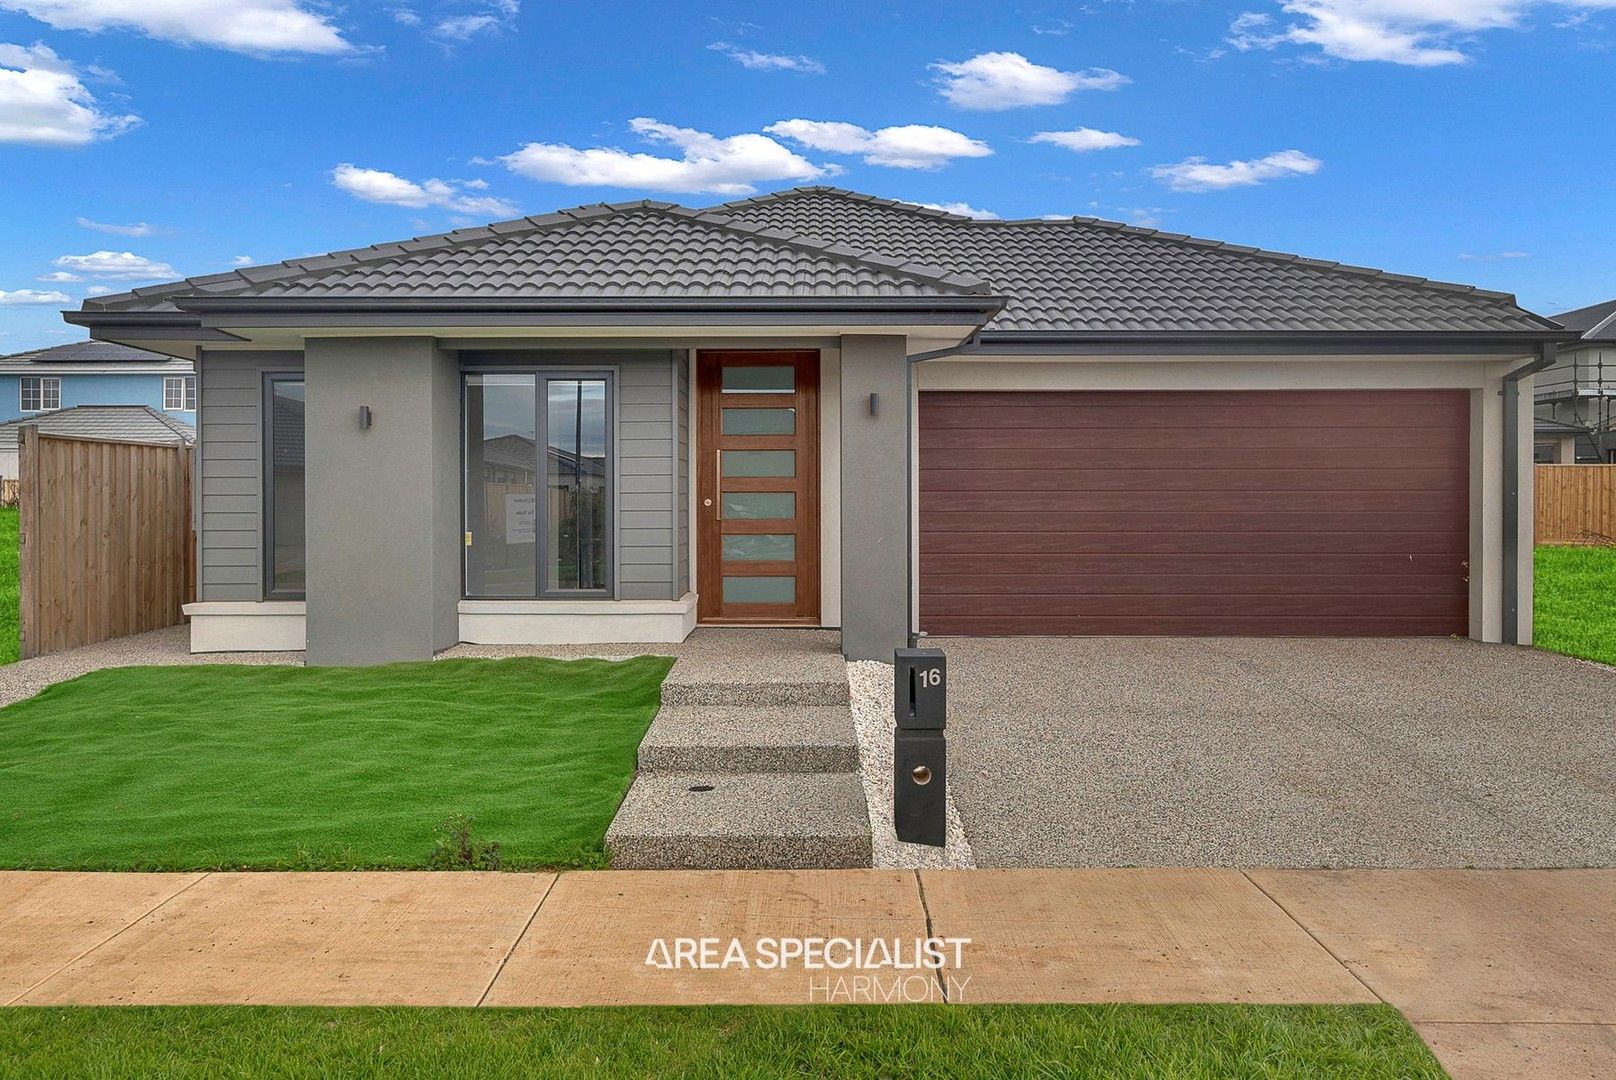 4 bedrooms House in 16 Hutton Street DEANSIDE VIC, 3336